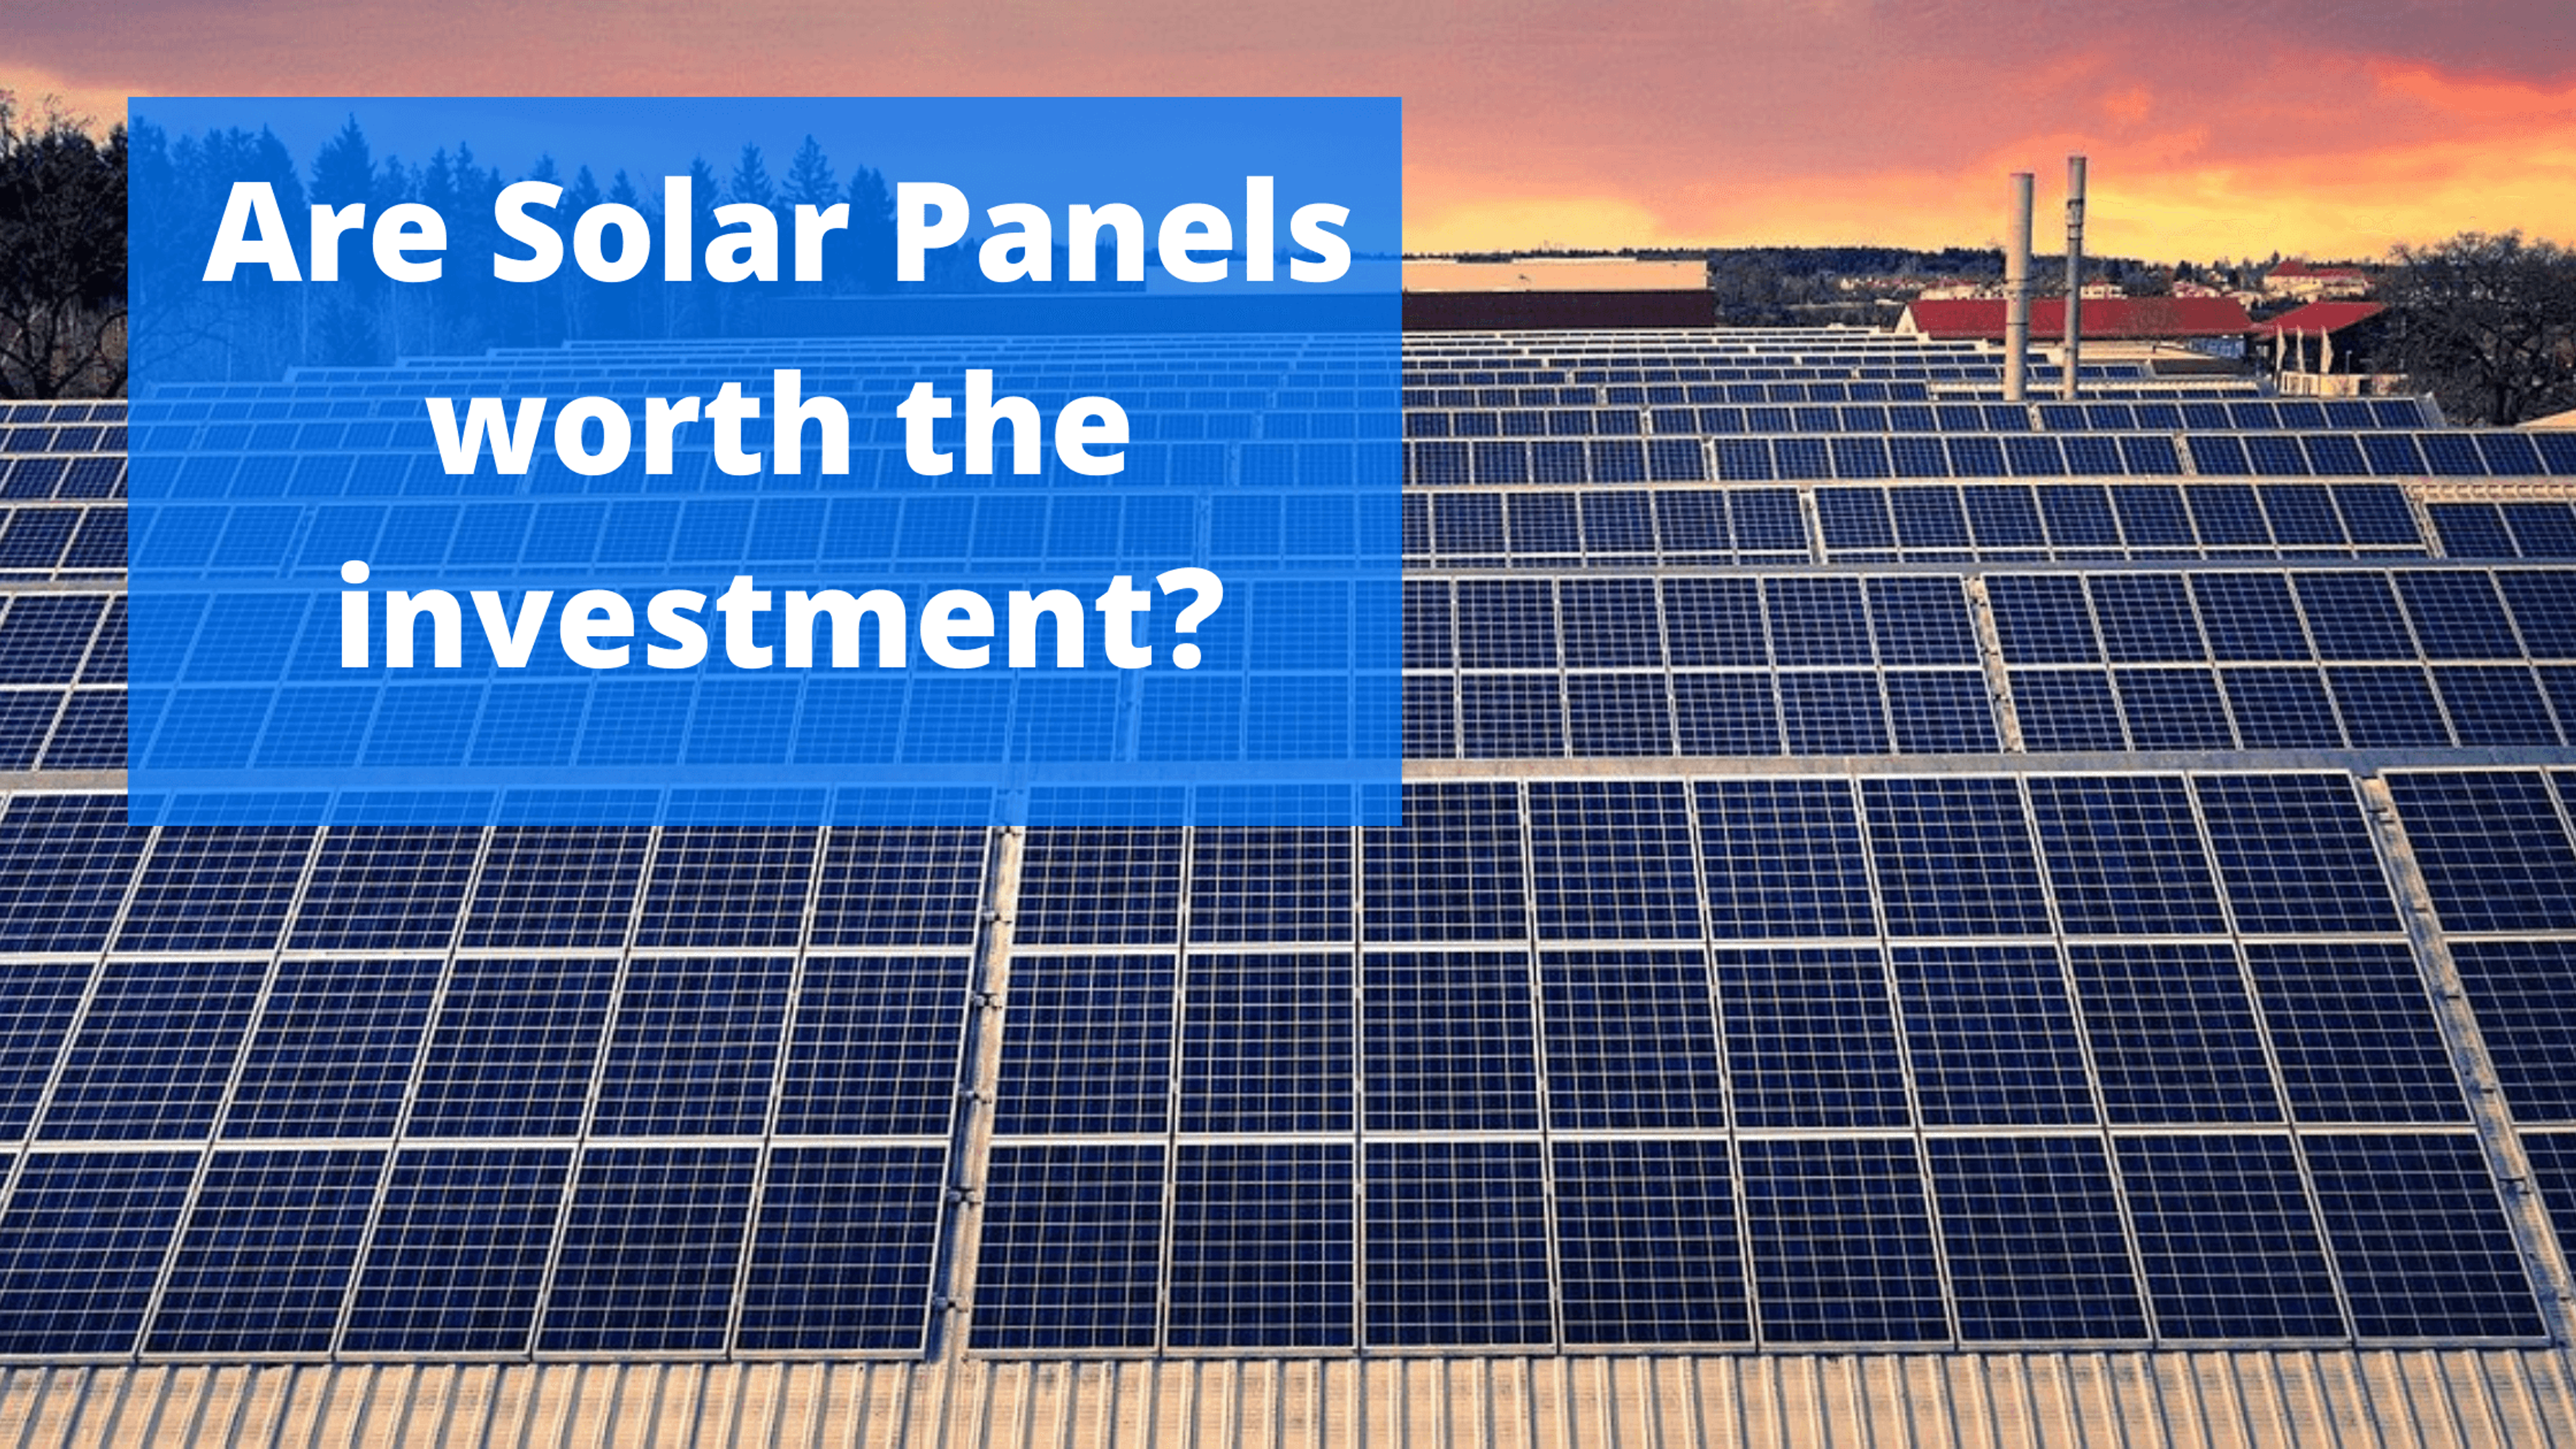 Are solar panels worth the investment?